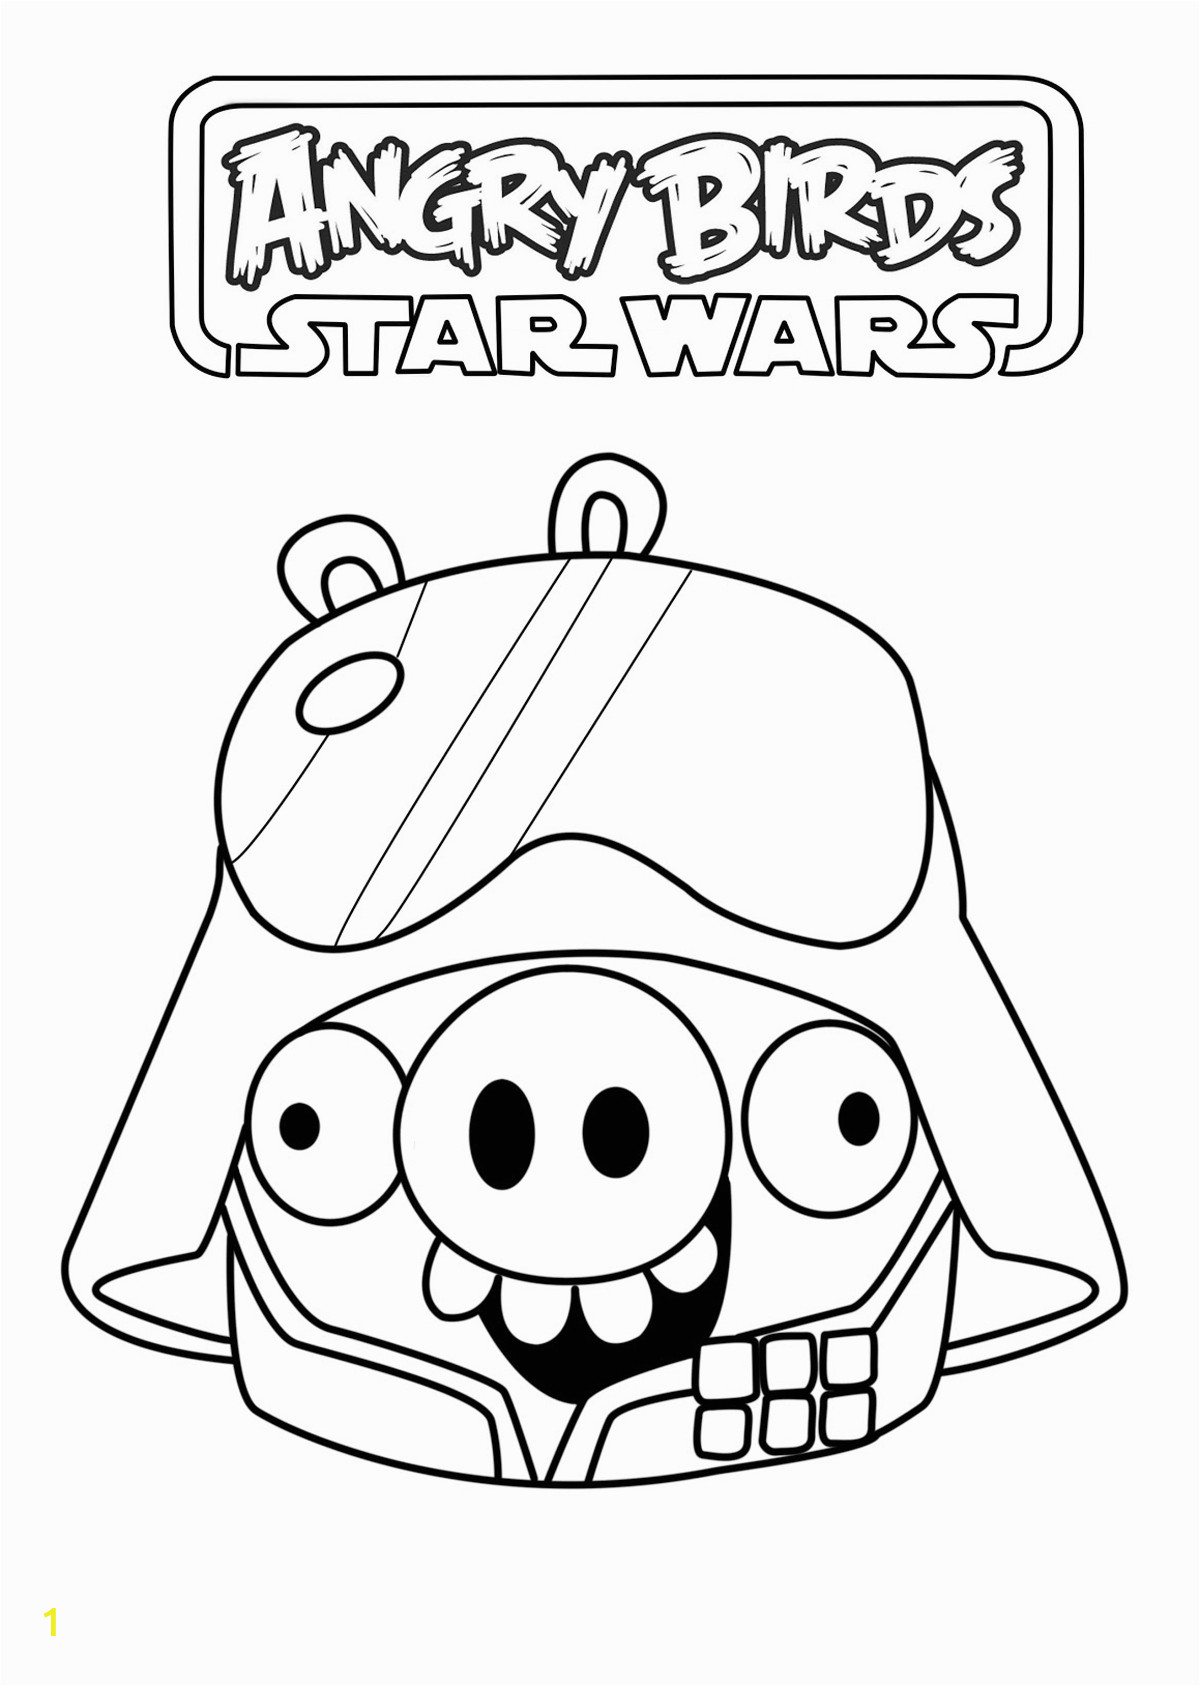 Angry Birds Star Wars Coloring Pages Angry Birds Star Wars to Angry Birds Star Wars